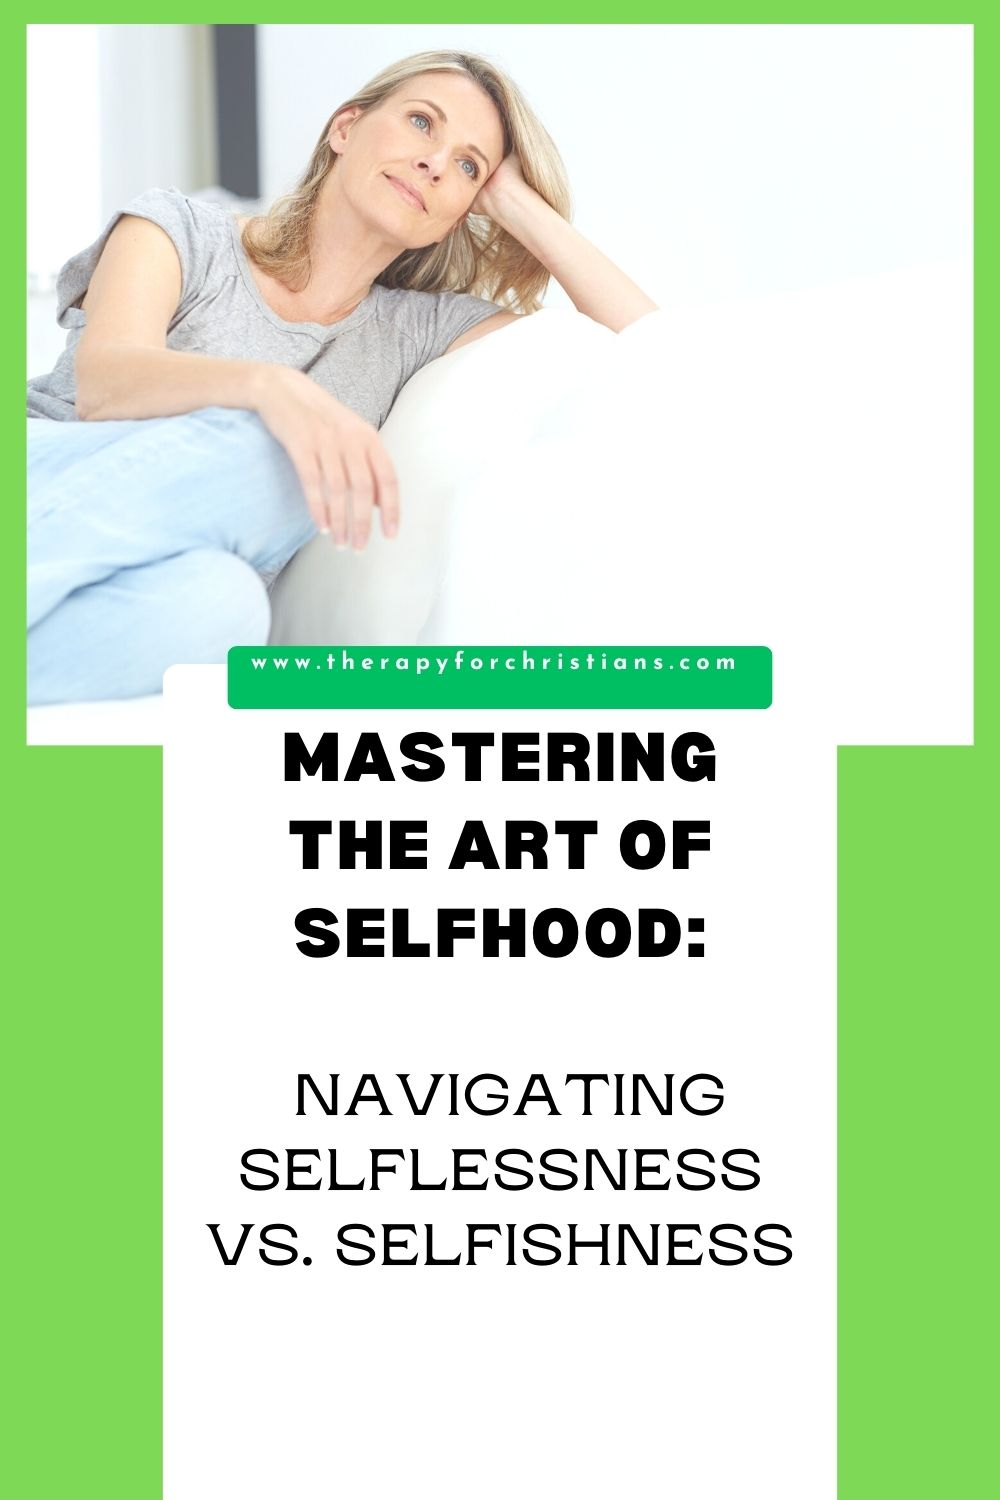 You can master the art of selfhood when the world decry selfishness